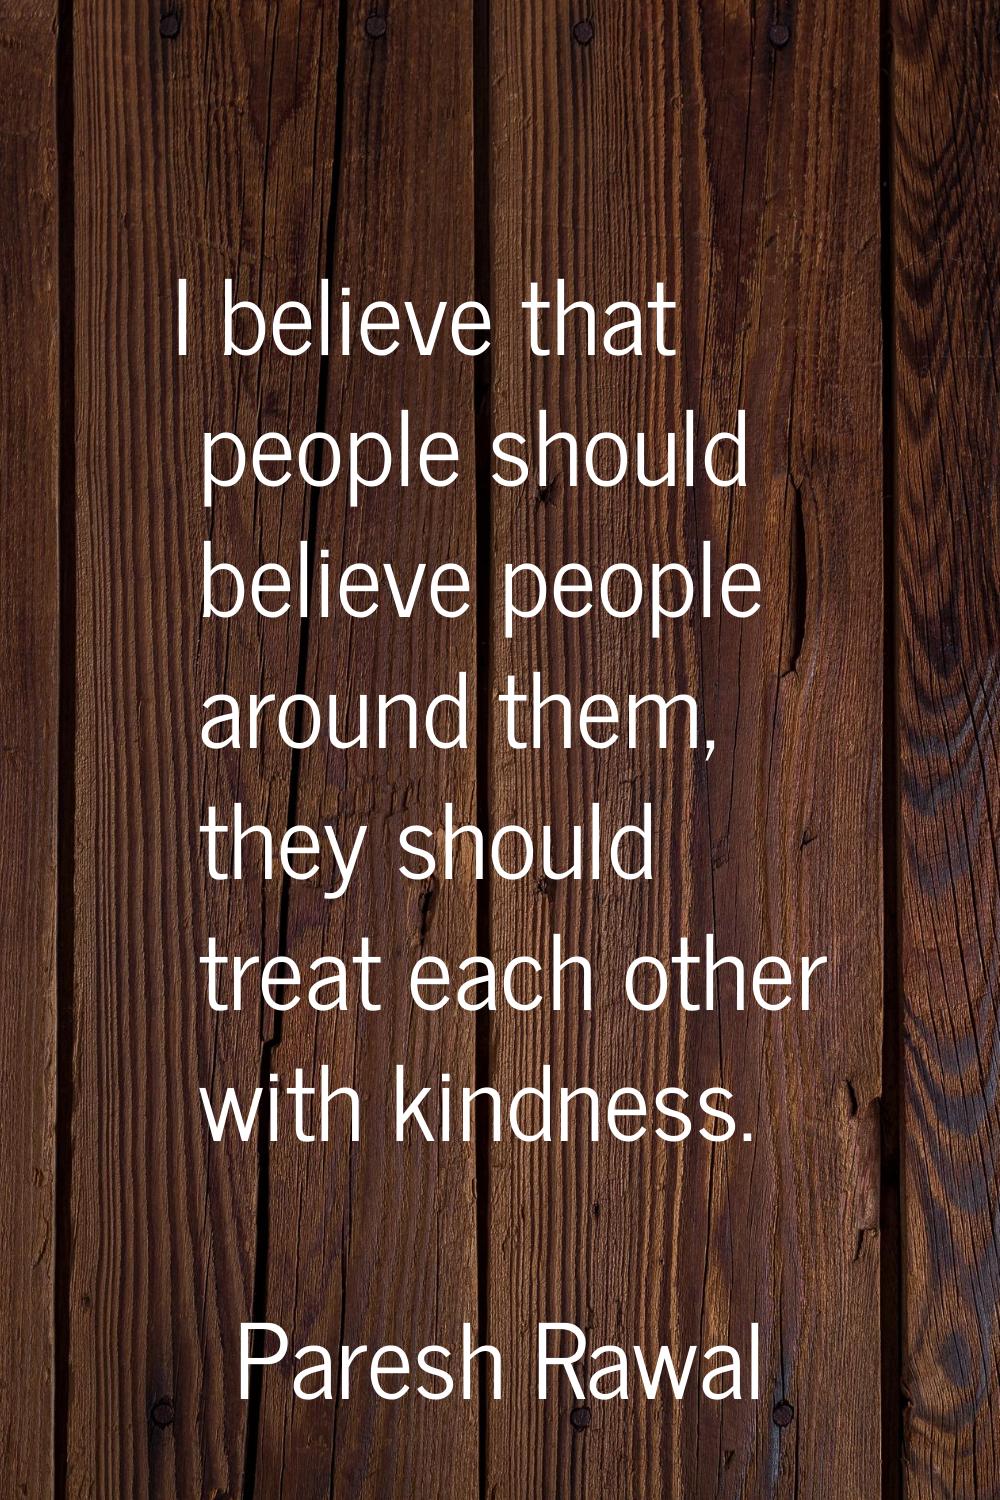 I believe that people should believe people around them, they should treat each other with kindness